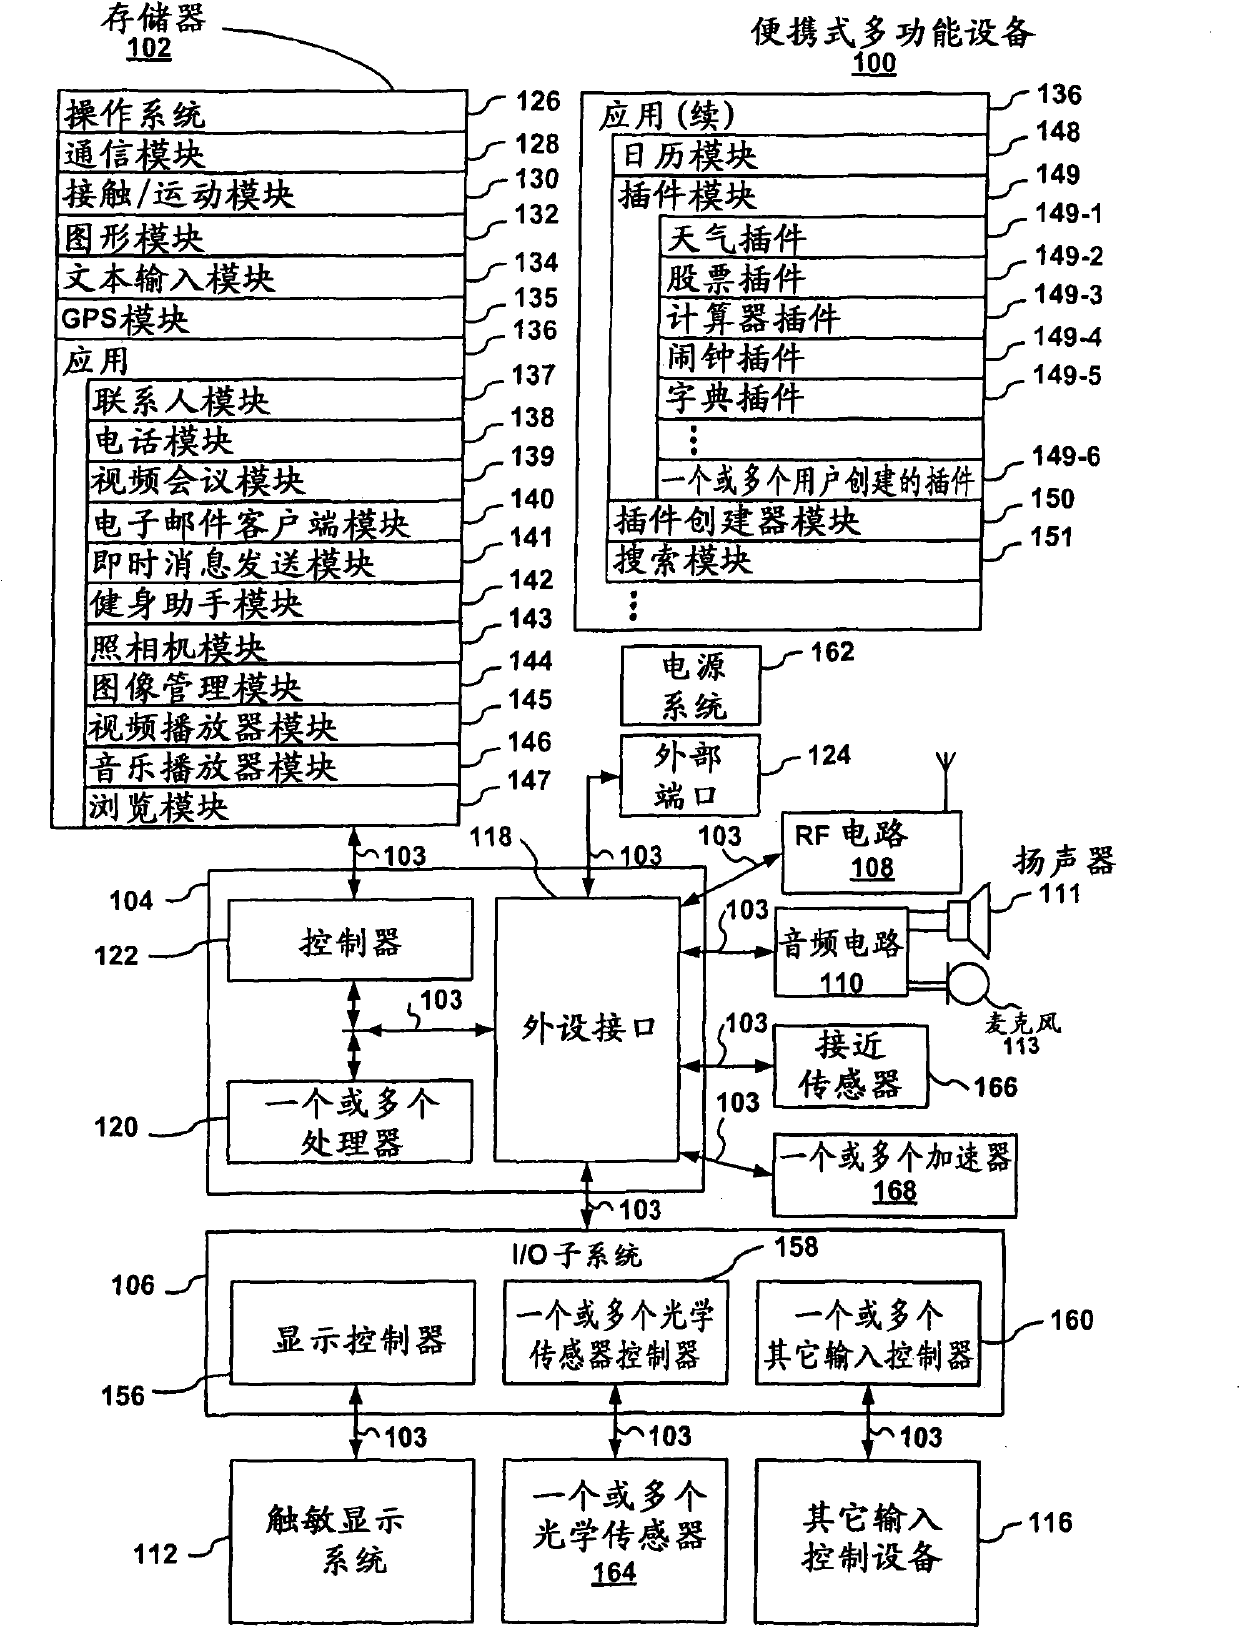 Method and device for scrolling multi-section document and multifunctional device